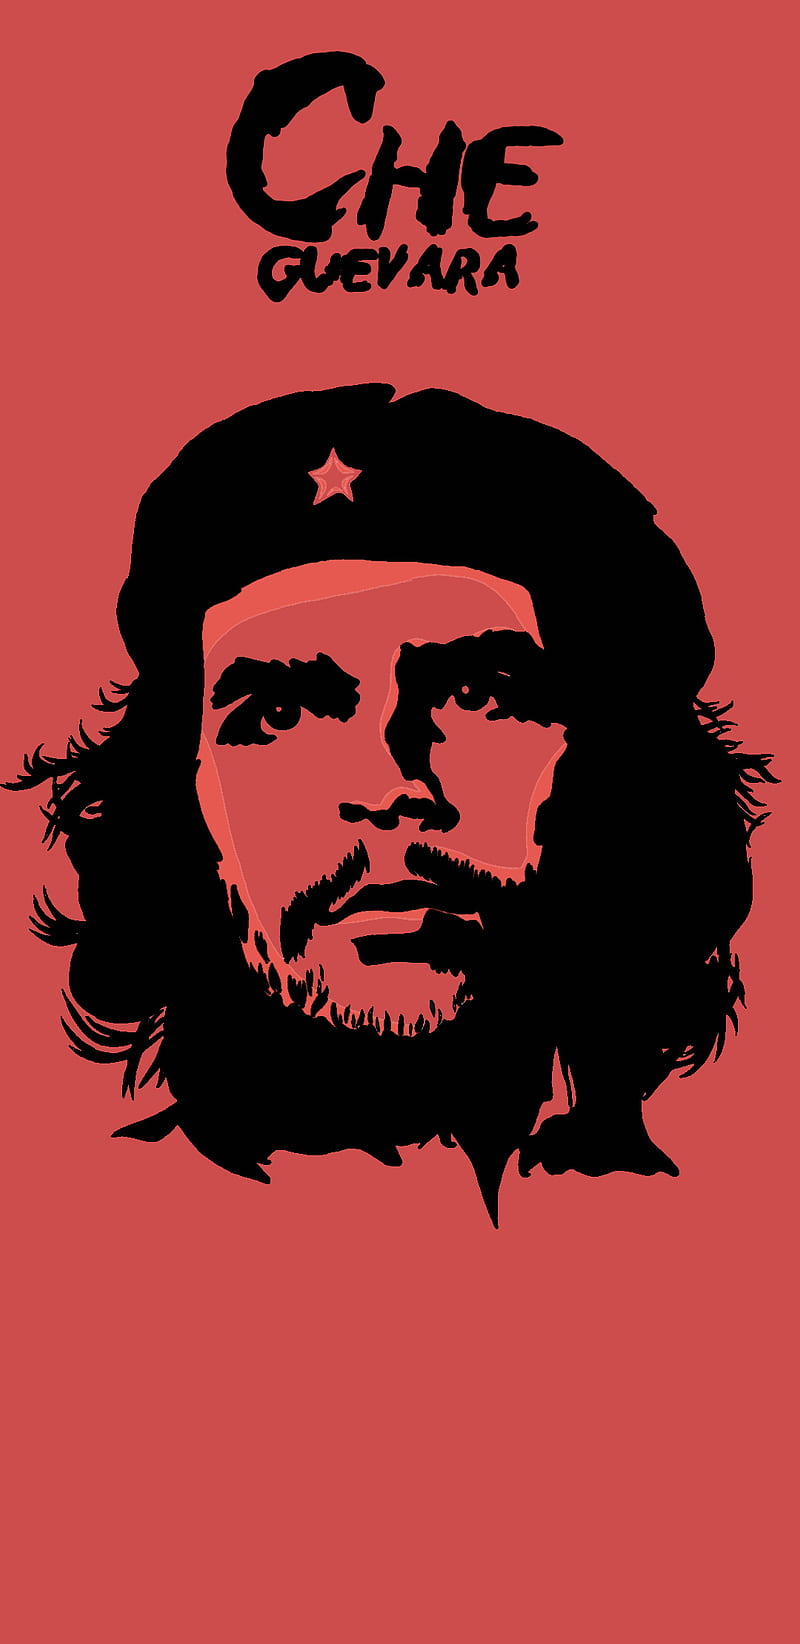 Che Guevara Hd Pics Wallpapers - Infoupdate.org